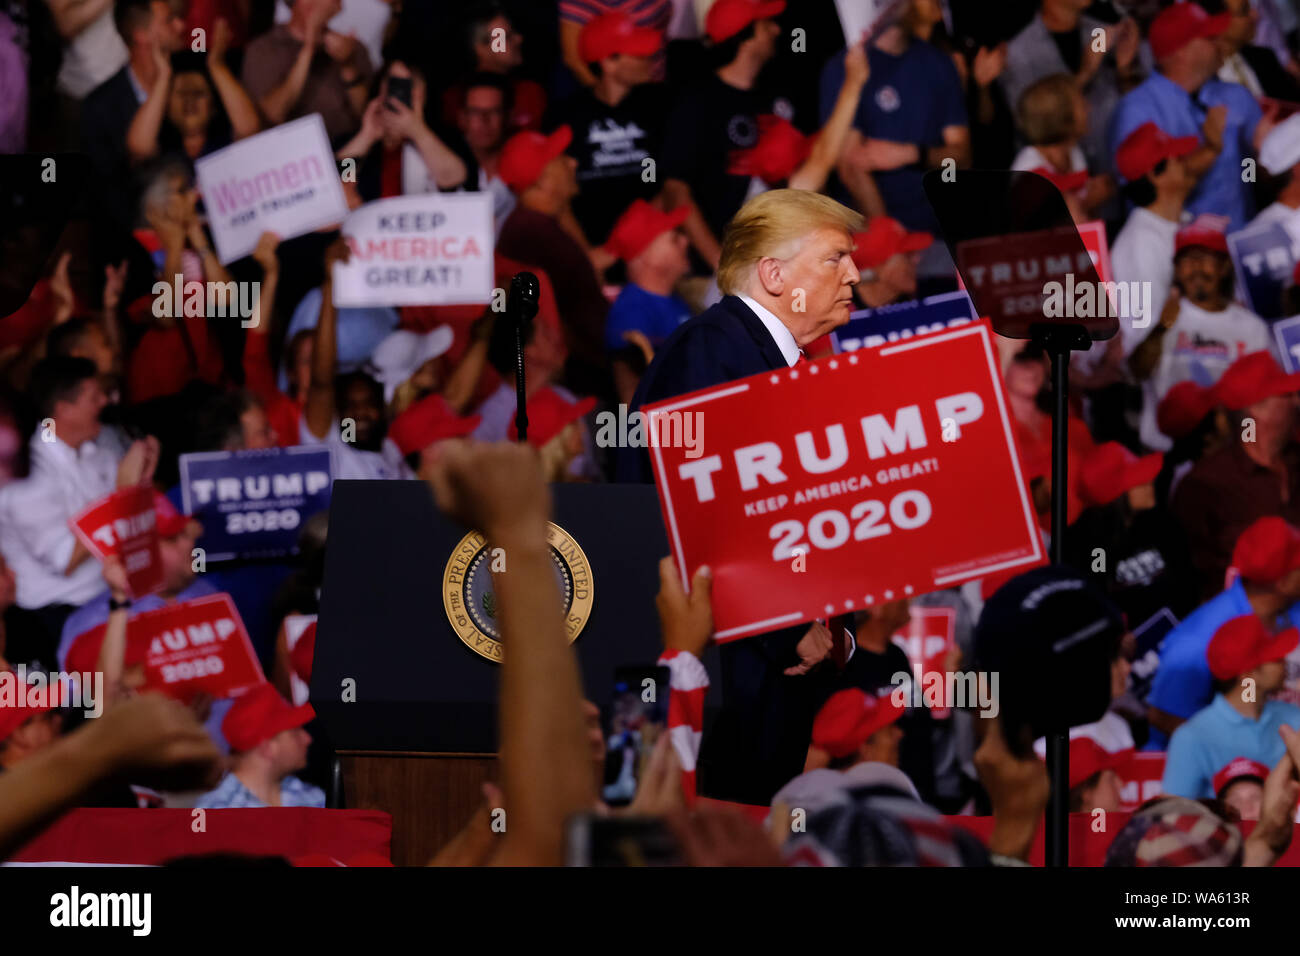 President Donald J. Trump seen during his campaign for the election next year in Manchester.The current US president is travelling around the country to host rallies for his supports and preparations for the 2020 US presidential election. Stock Photo